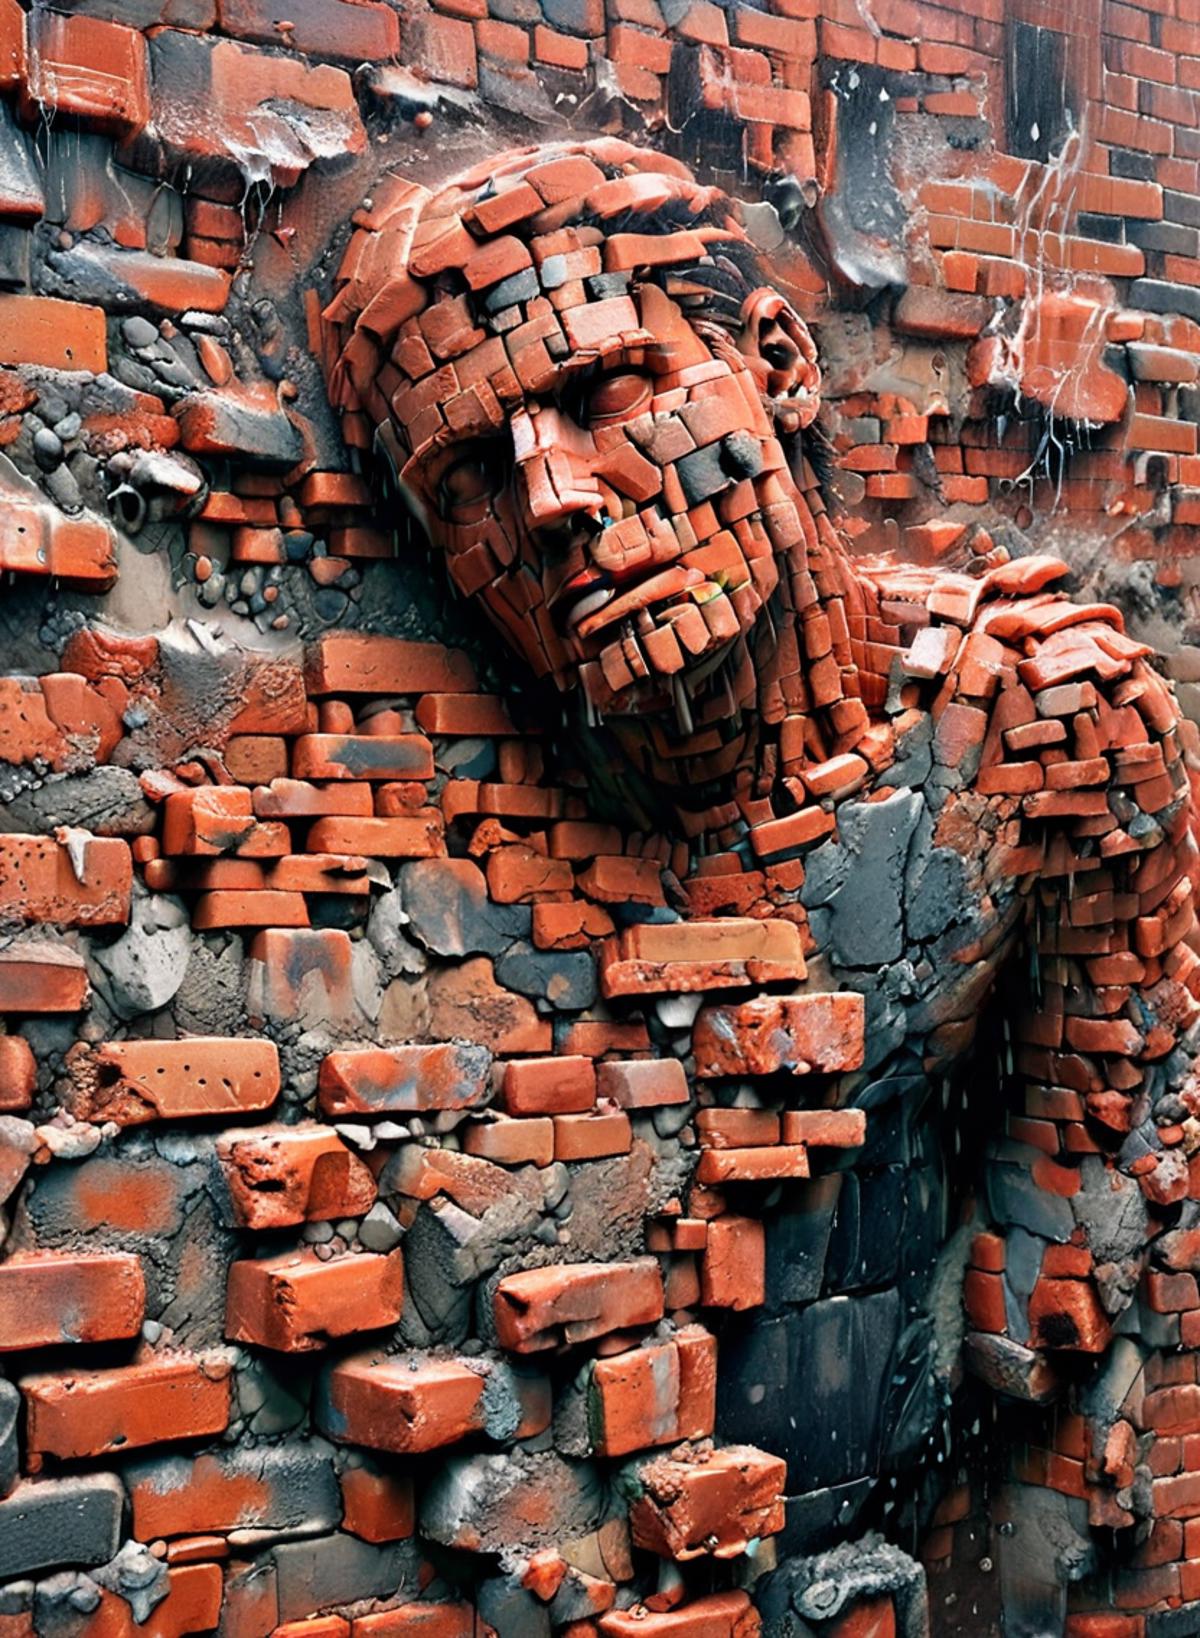 The face of a man made out of brick walls.